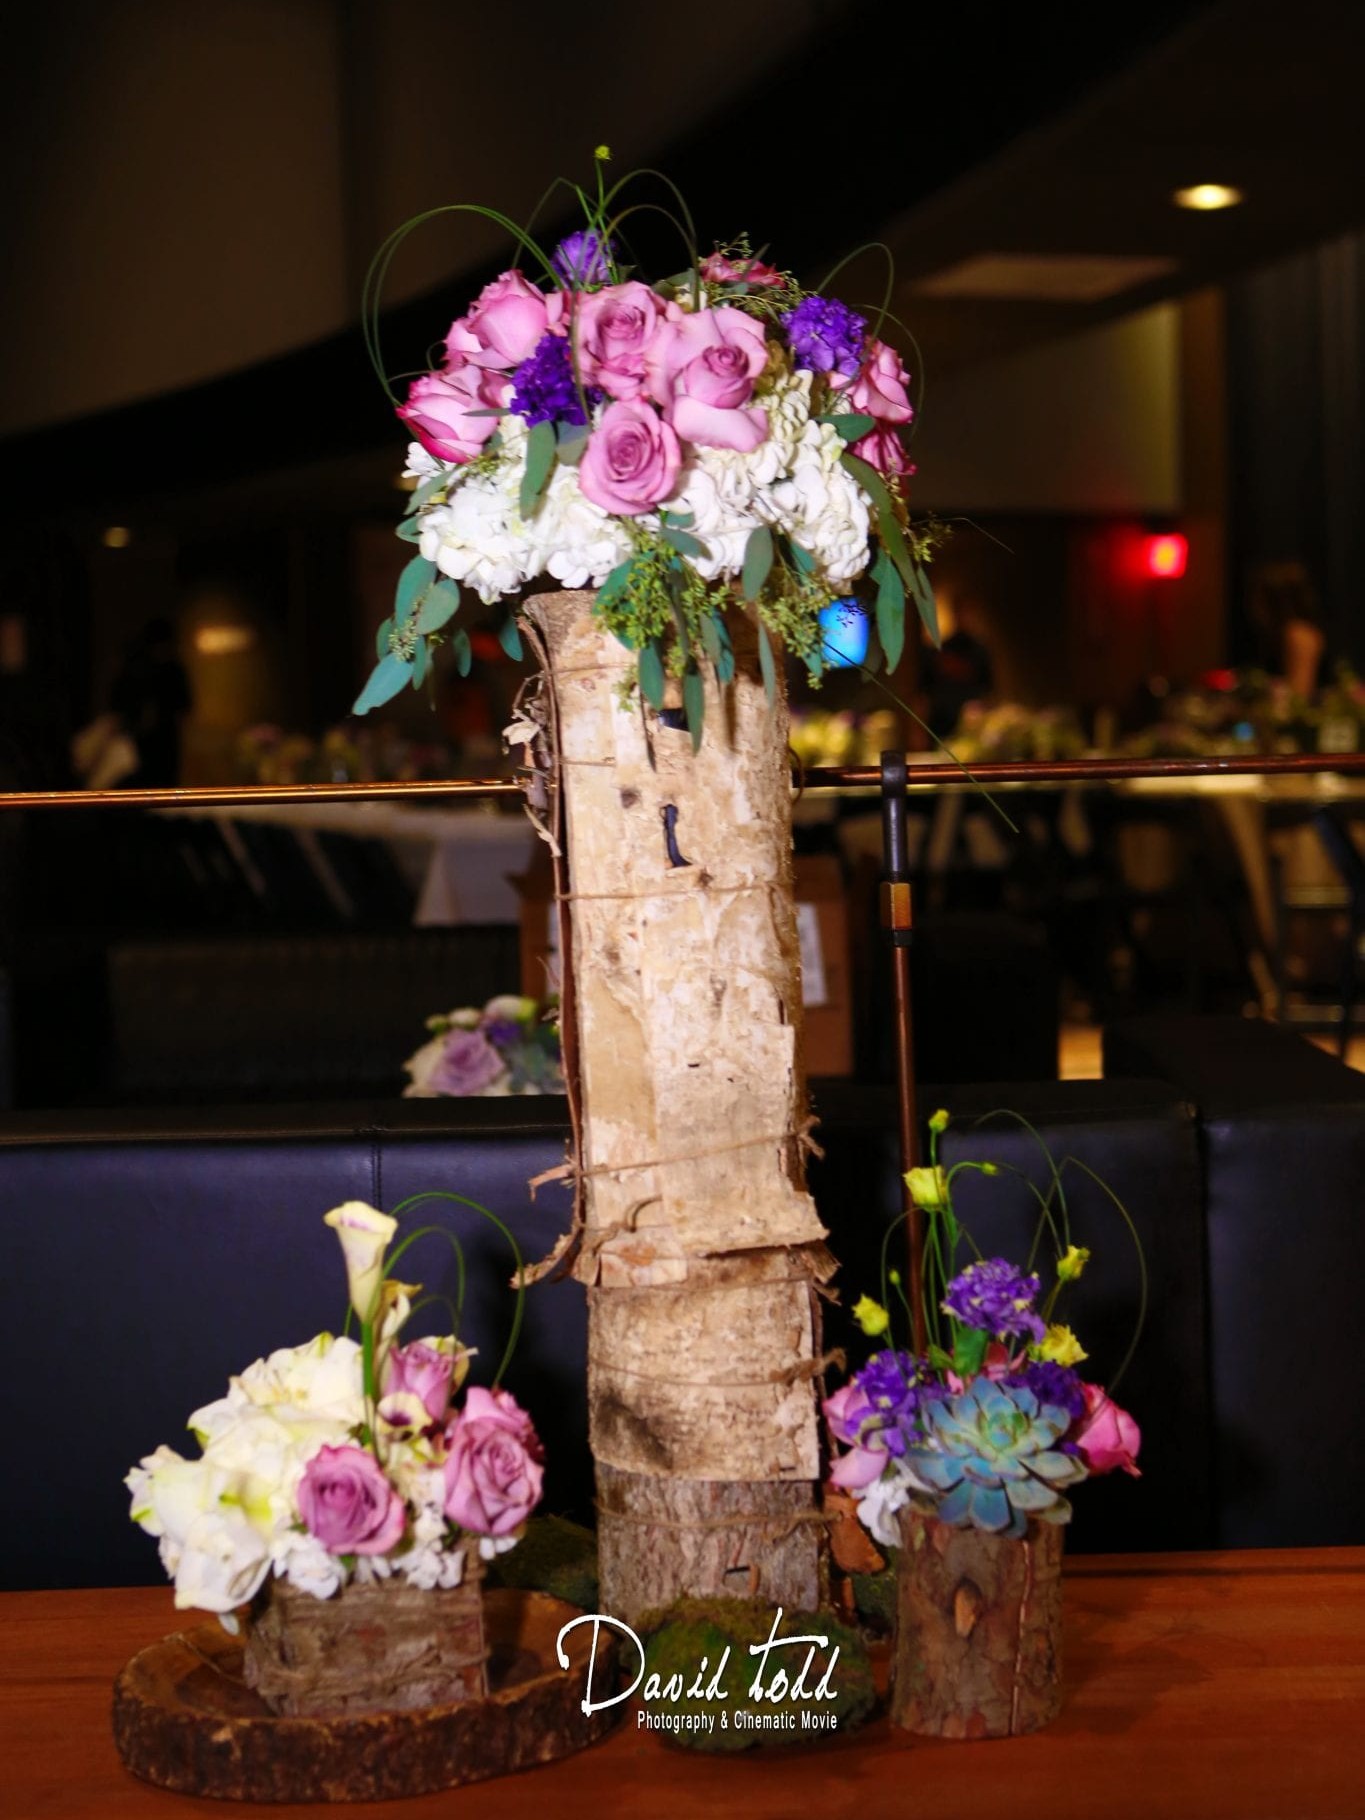 A floral centerpiece on a birch log featuring pink and purple flowers, surrounded by smaller arrangements, in a dimly lit event hall.